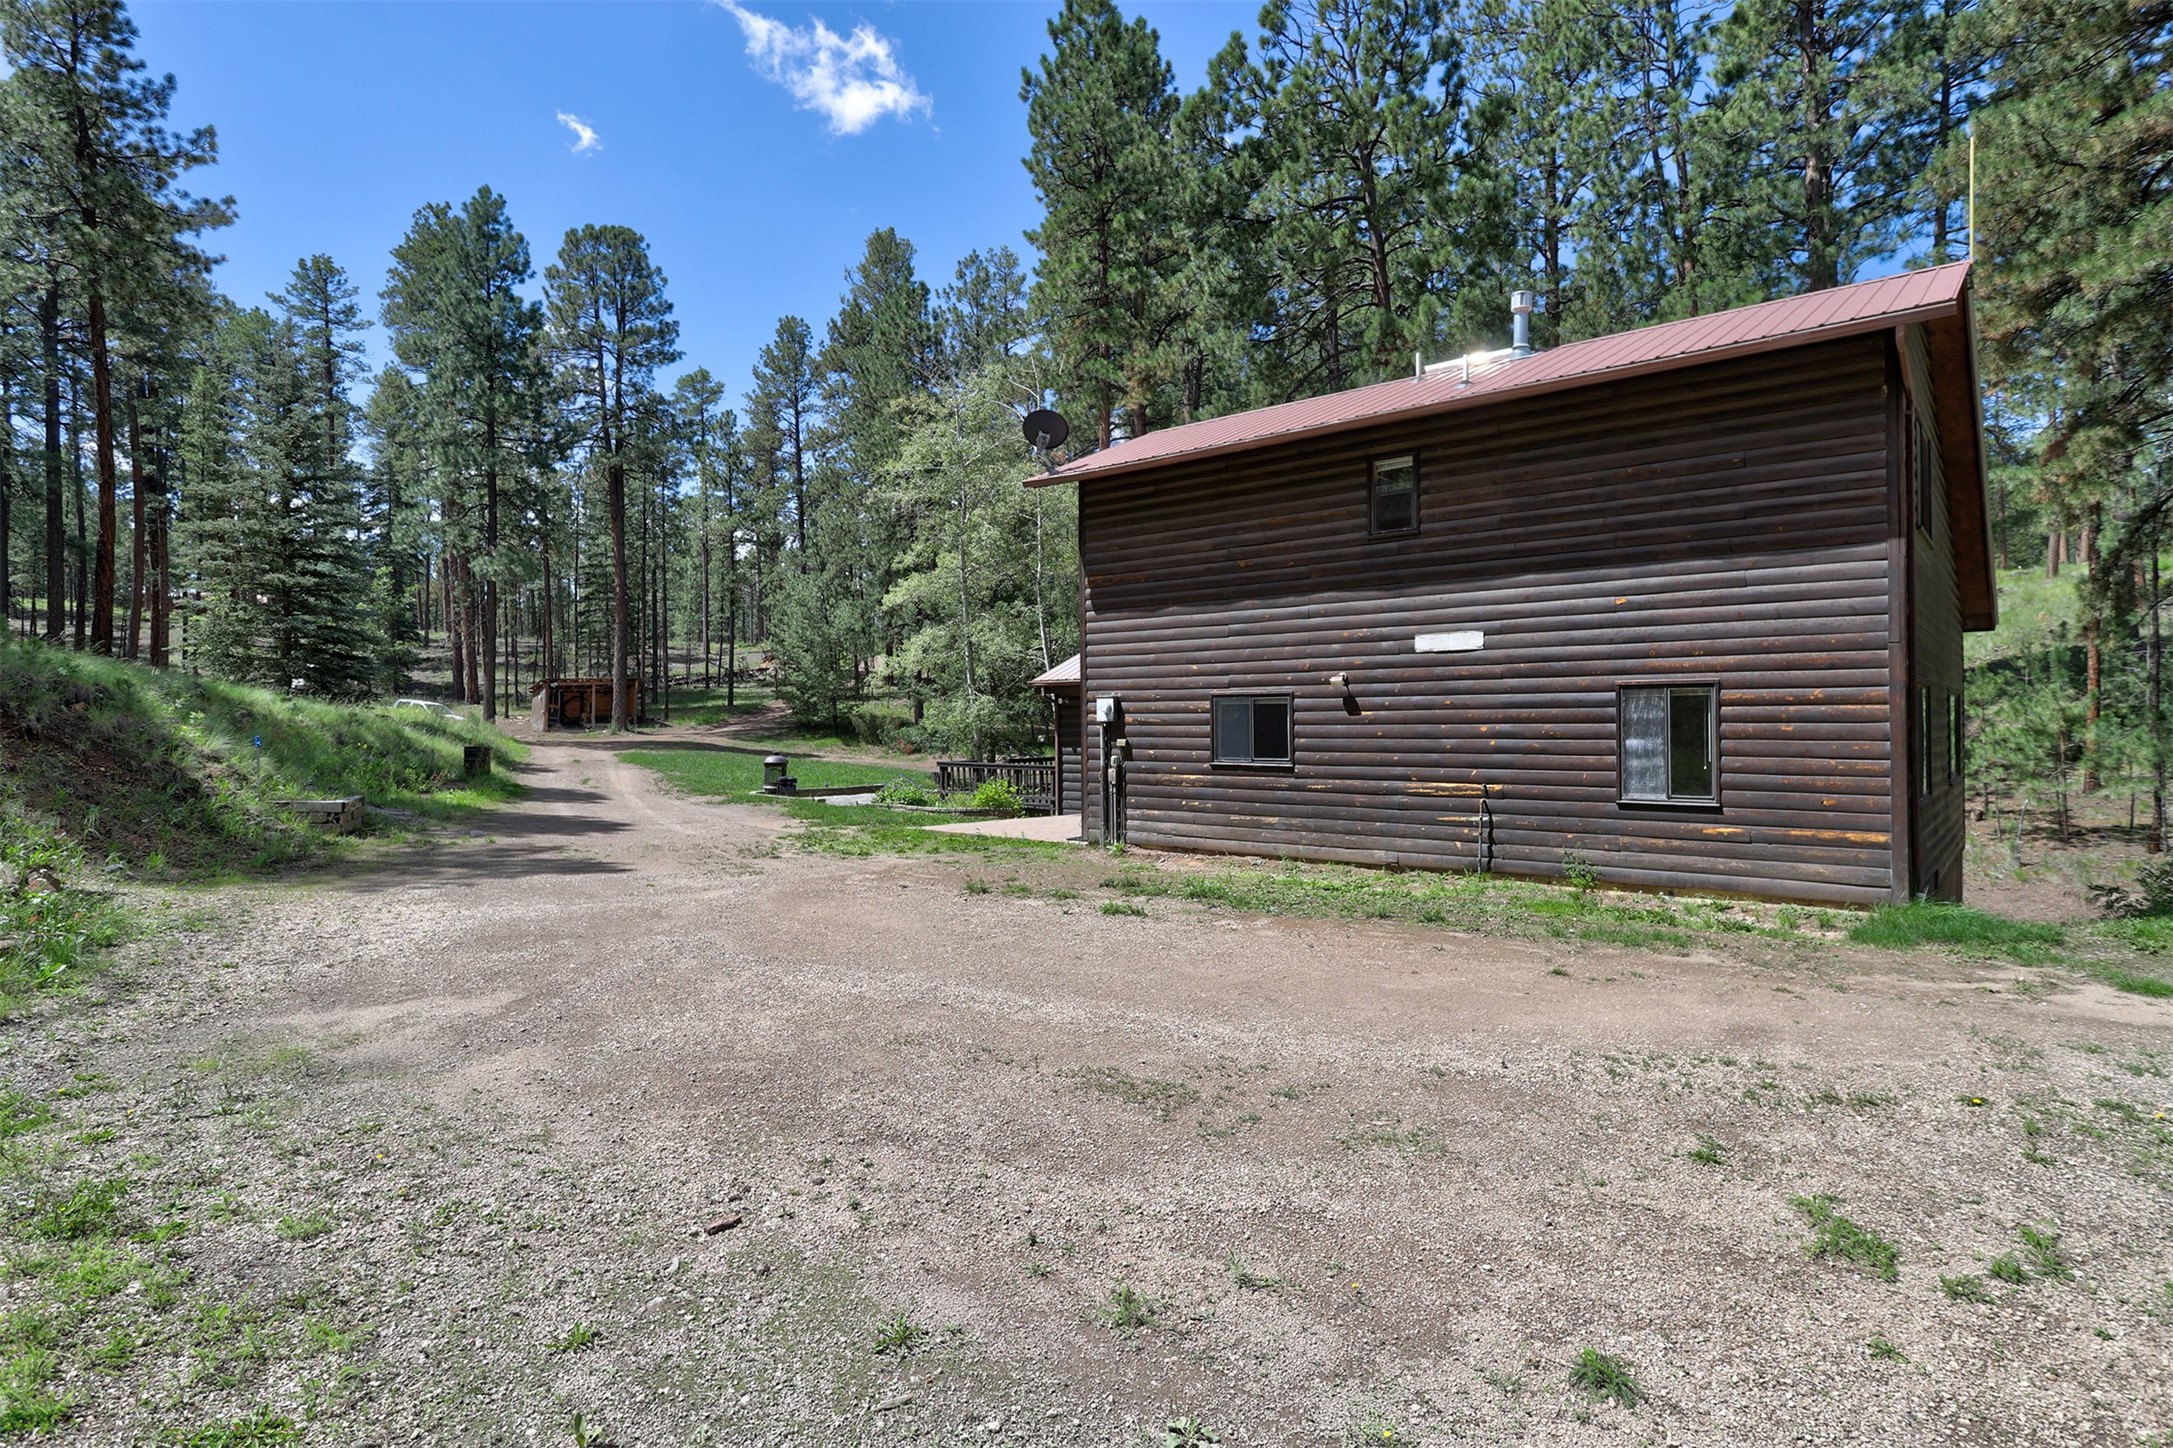 271 Forest Road 134, Jemez Springs, New Mexico 87025, 3 Bedrooms Bedrooms, ,1 BathroomBathrooms,Residential,For Sale,271 Forest Road 134,202232464